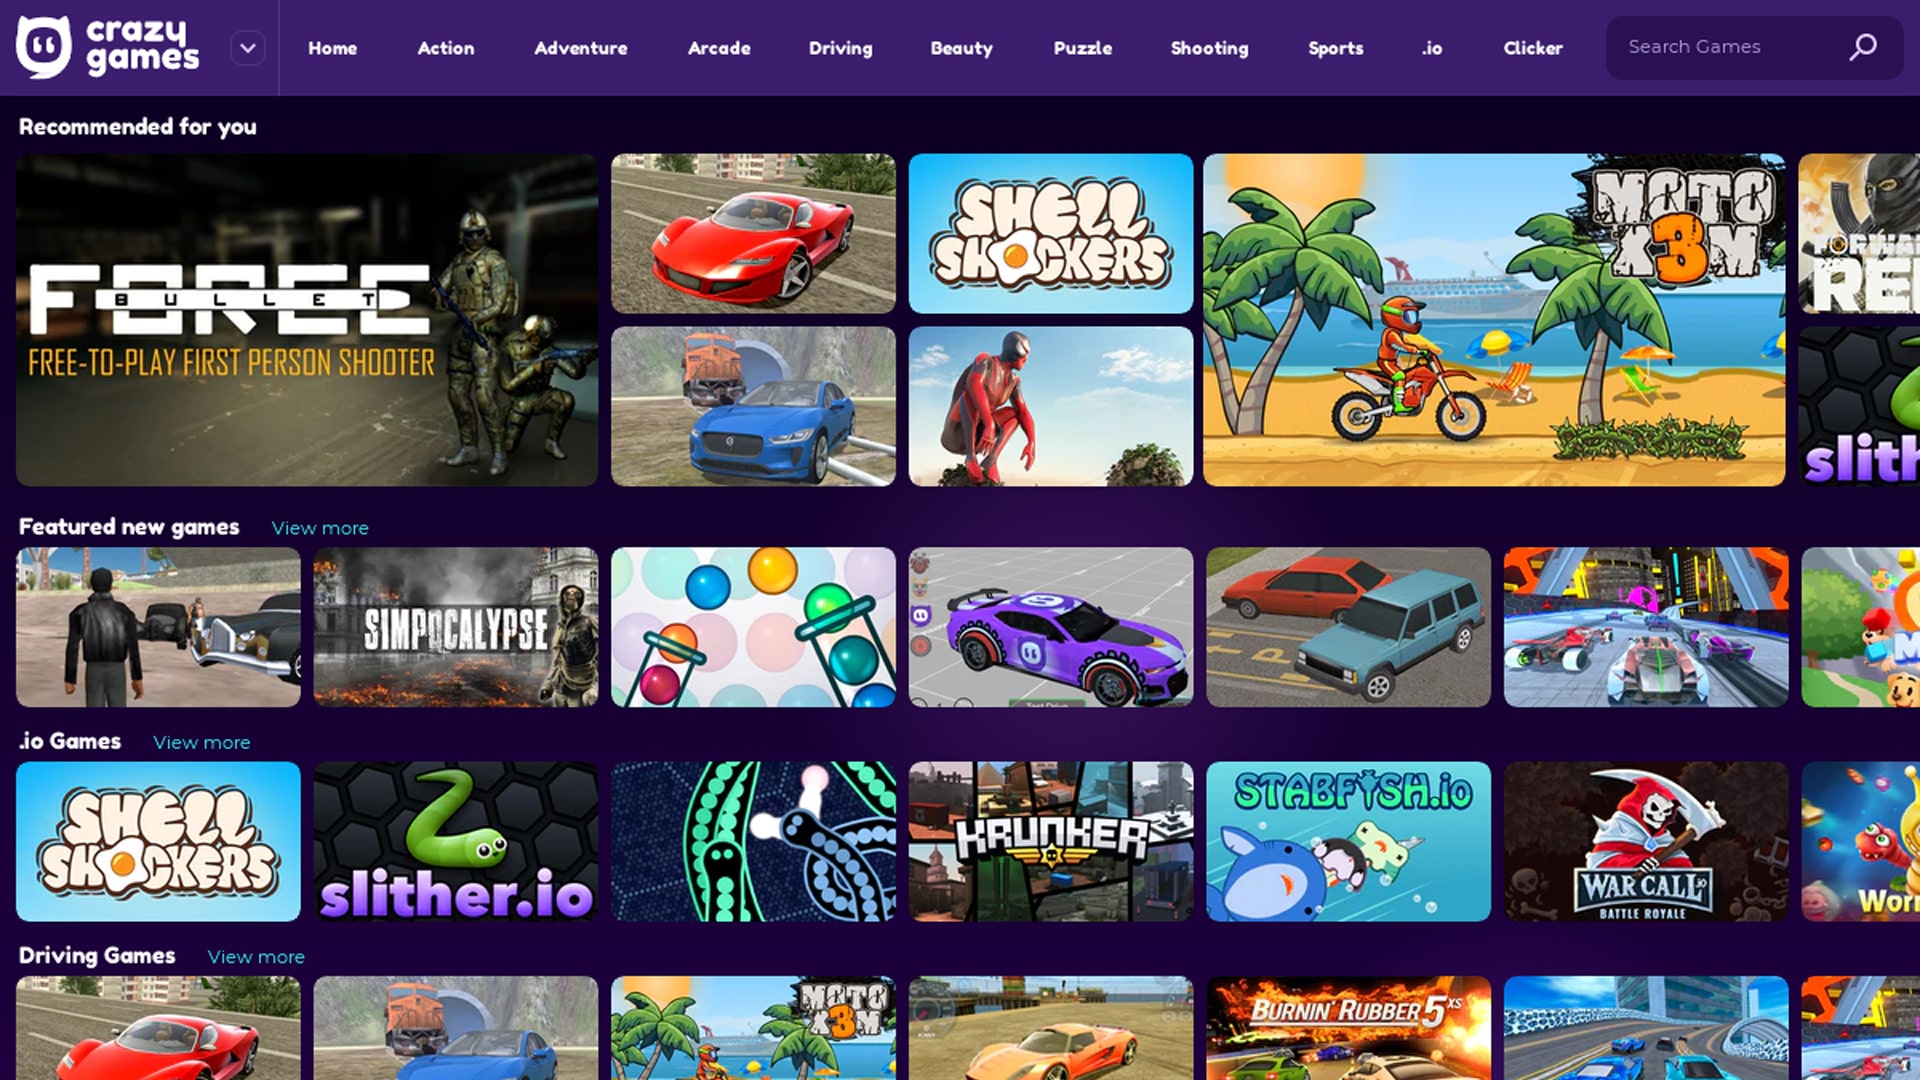 Screenshot of the Crazy Games website menu, displaying a wide selection of game categories for users to choose from